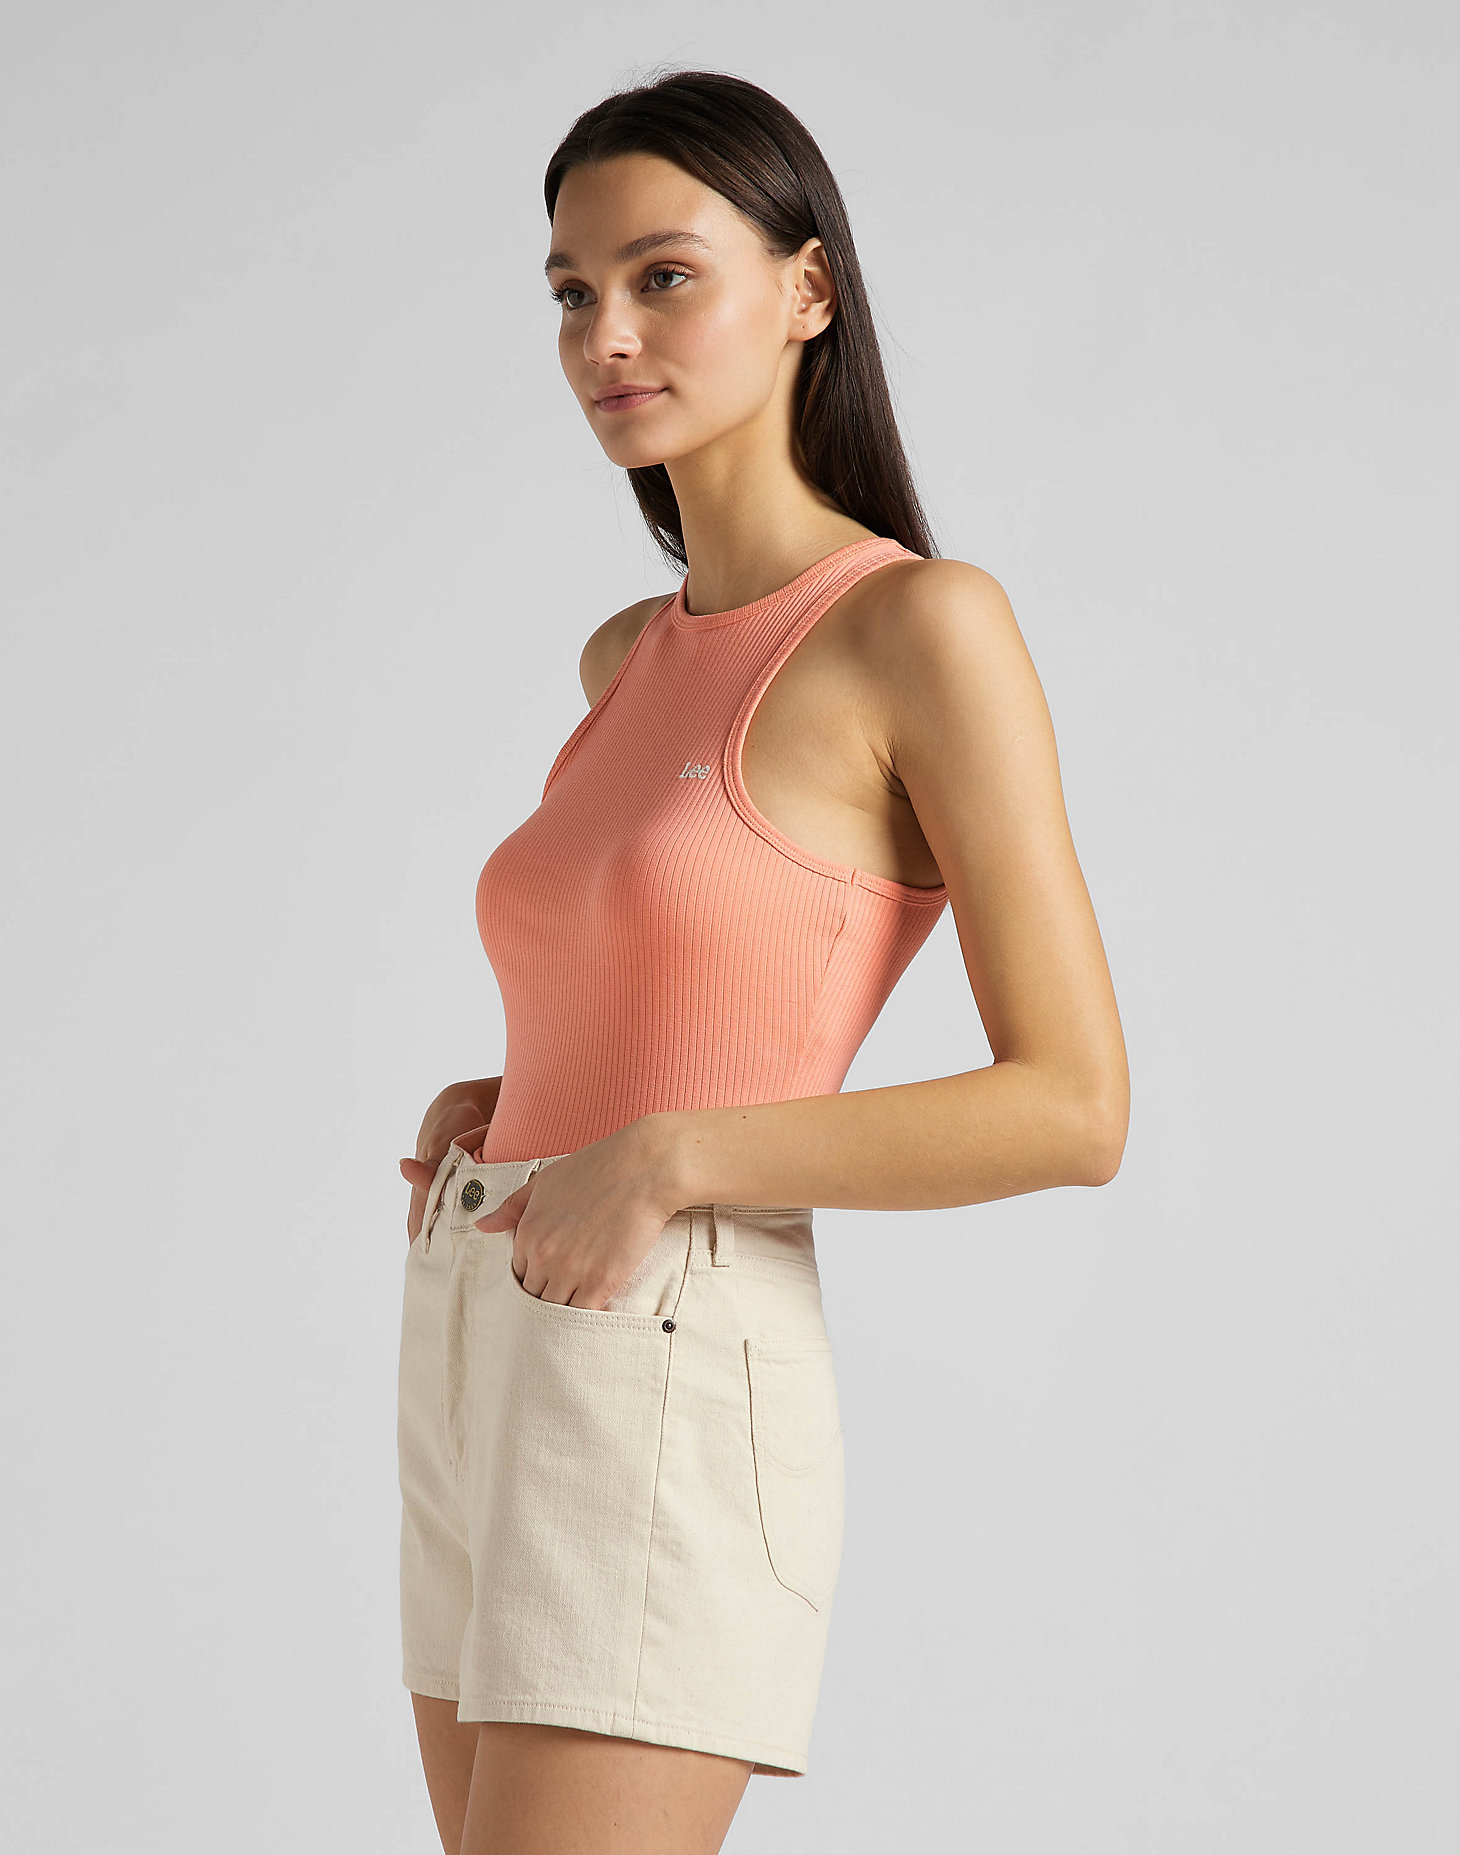 Ribbed Tank in Bright Coral alternative view 3